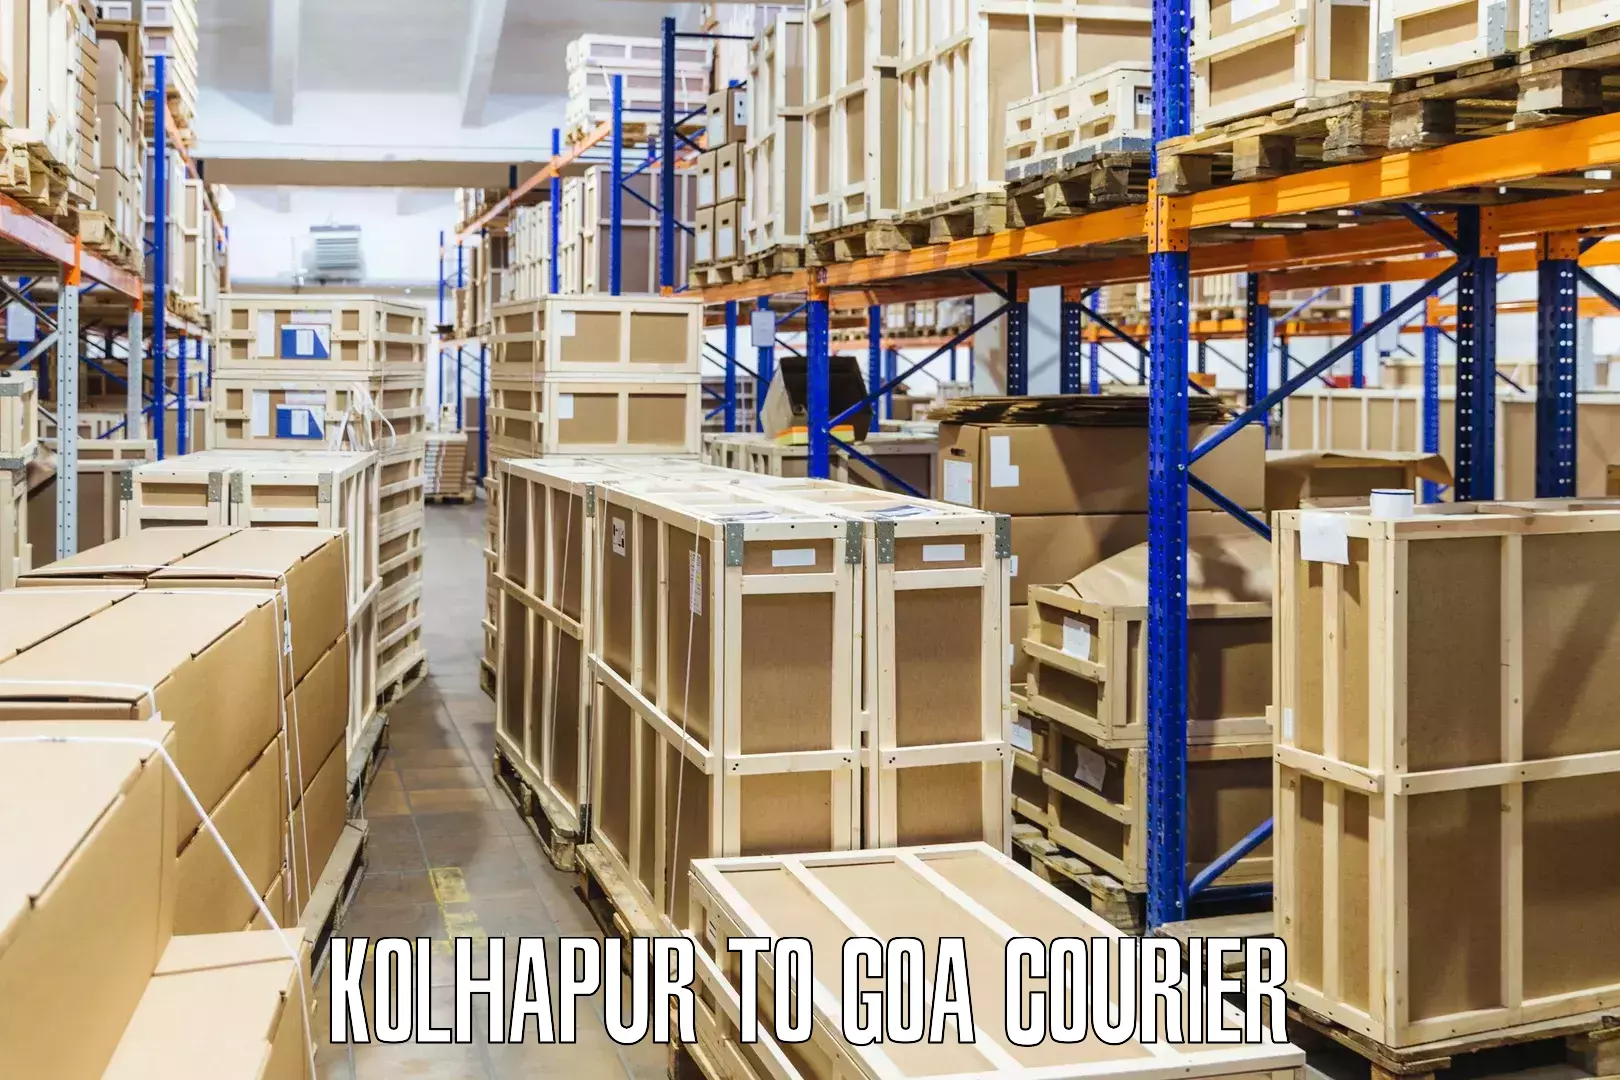 Round-the-clock parcel delivery in Kolhapur to Panaji